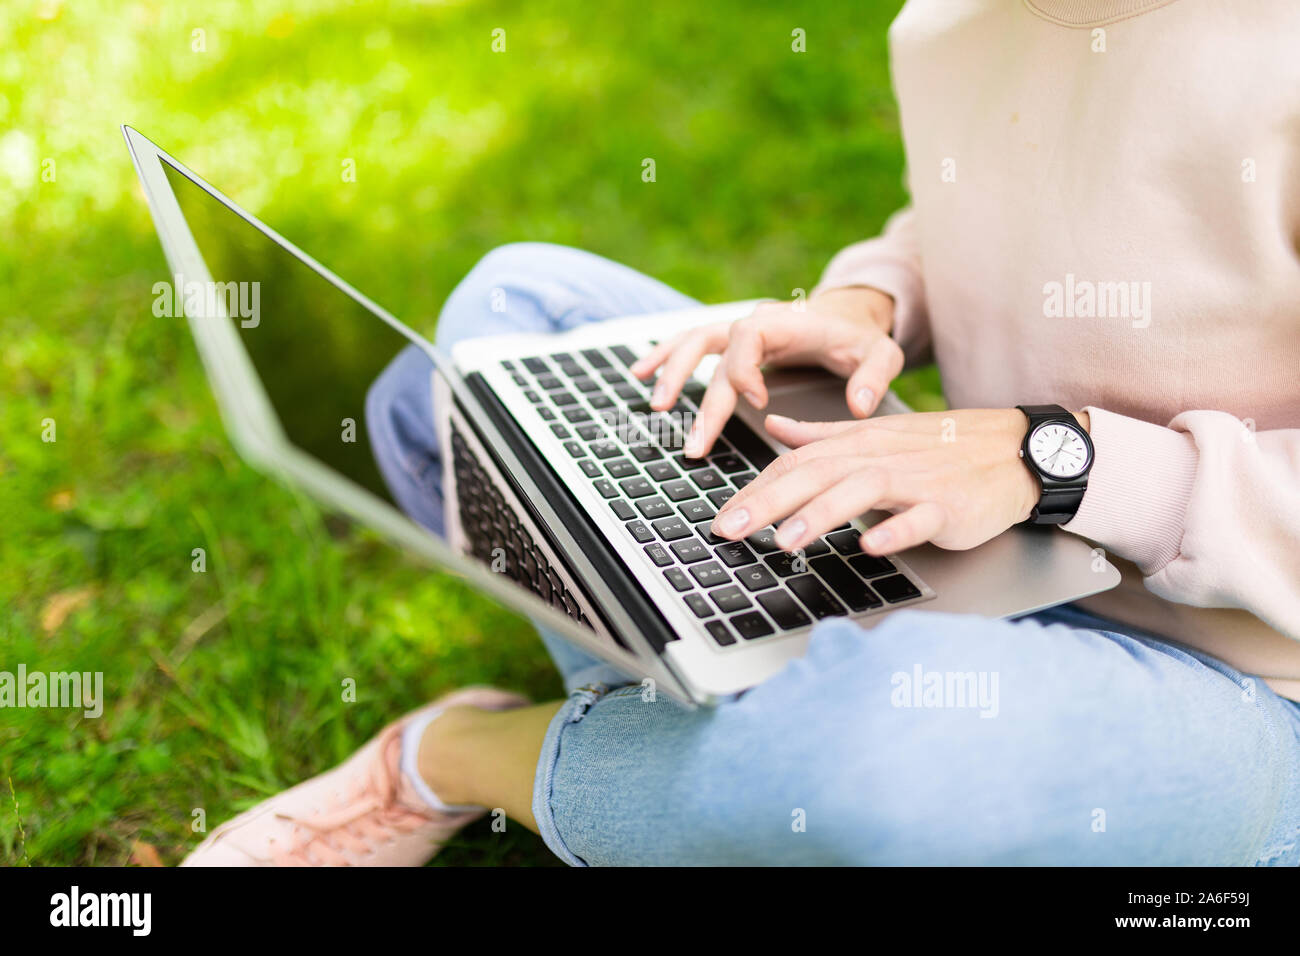 Young caucasian woman with perfect smile, plump lips, glasses walks in nature, sits on a grass with laptop and communicated with friends or works Stock Photo